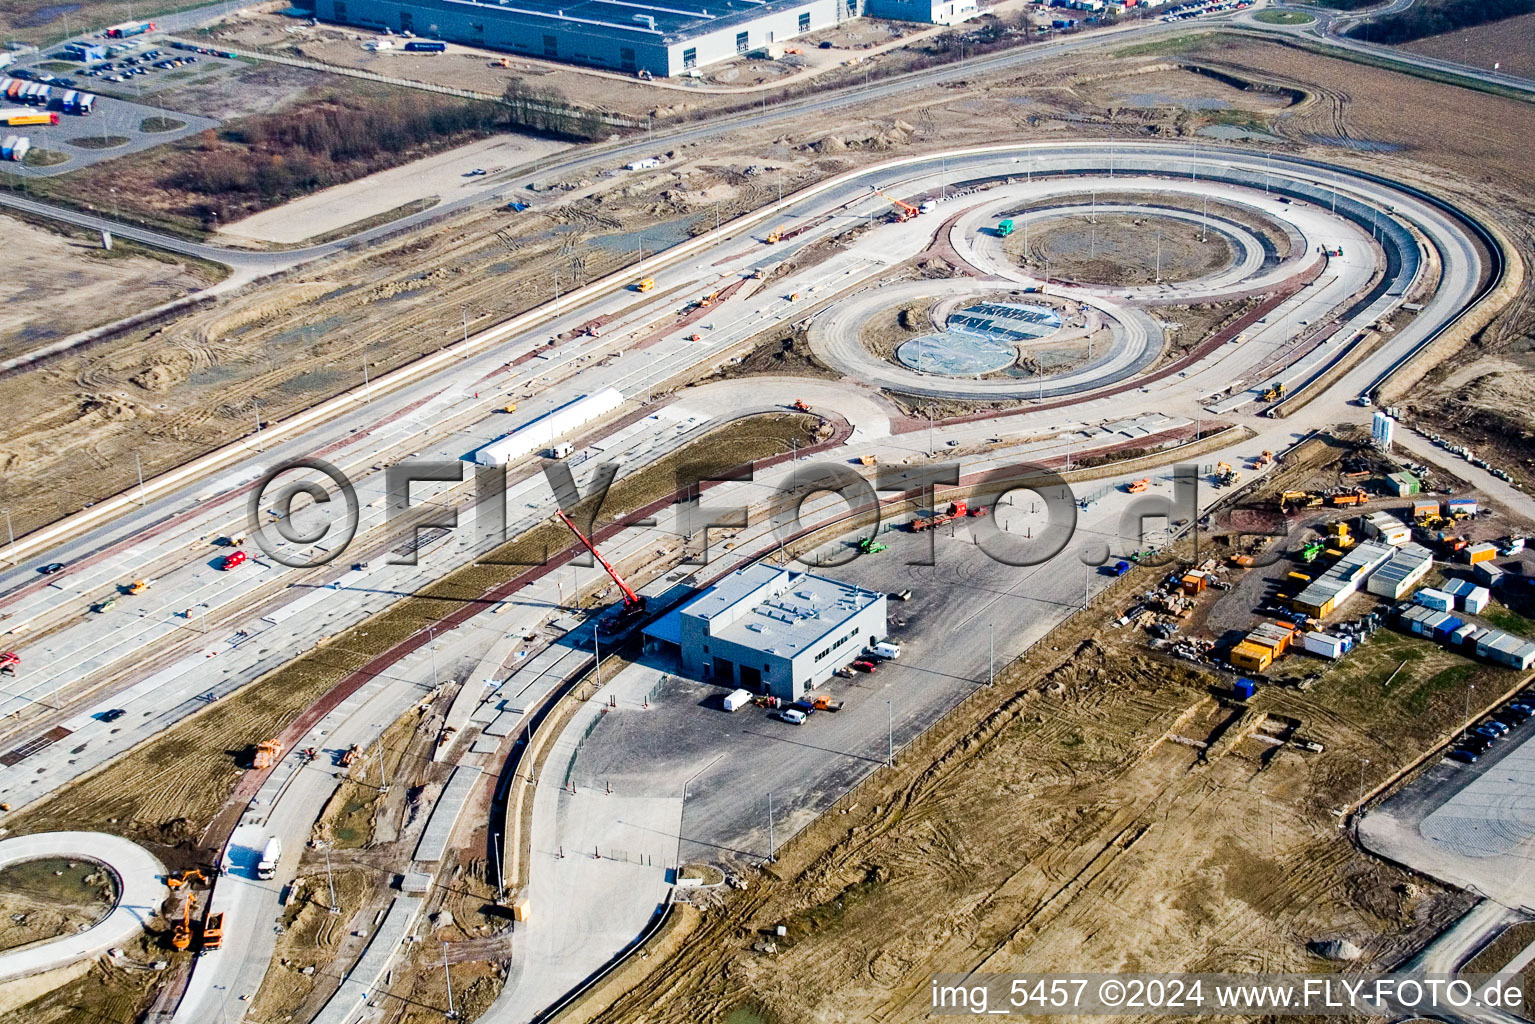 Aerial photograpy of Daimler-Chrysler truck test track in Wörth am Rhein in the state Rhineland-Palatinate, Germany